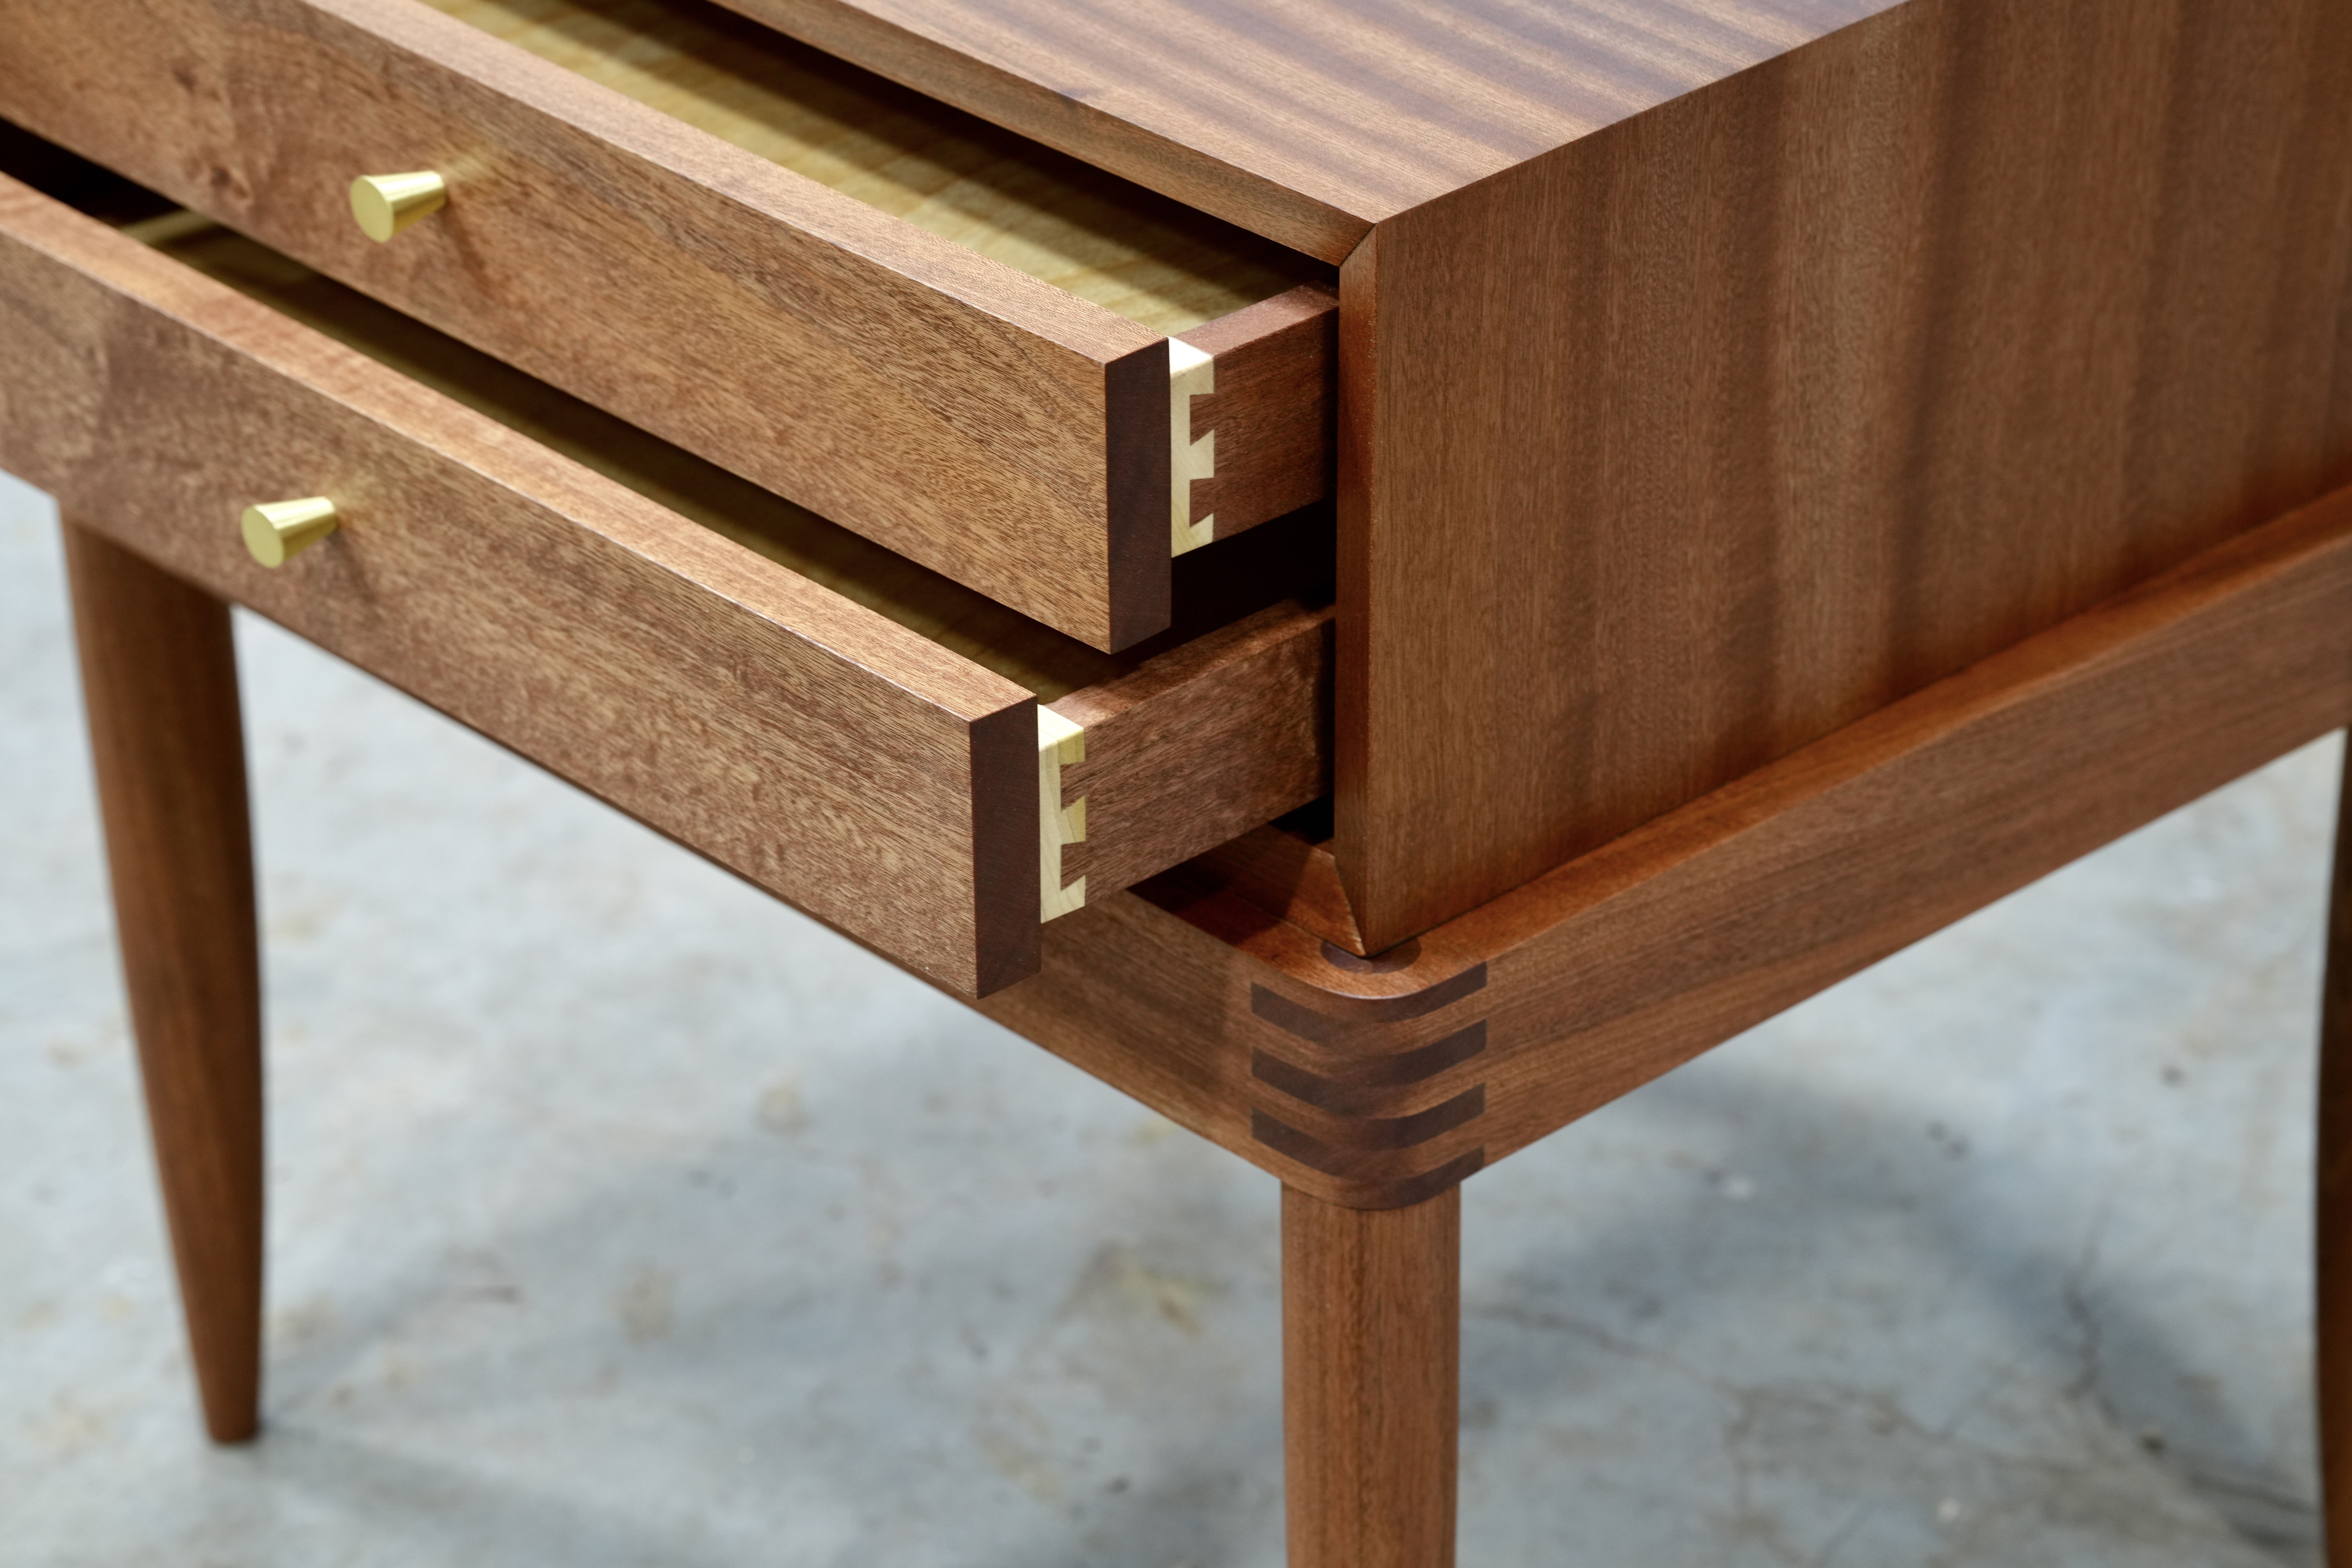 A close-up of the finger joints and dovetails in a sapele nightstand